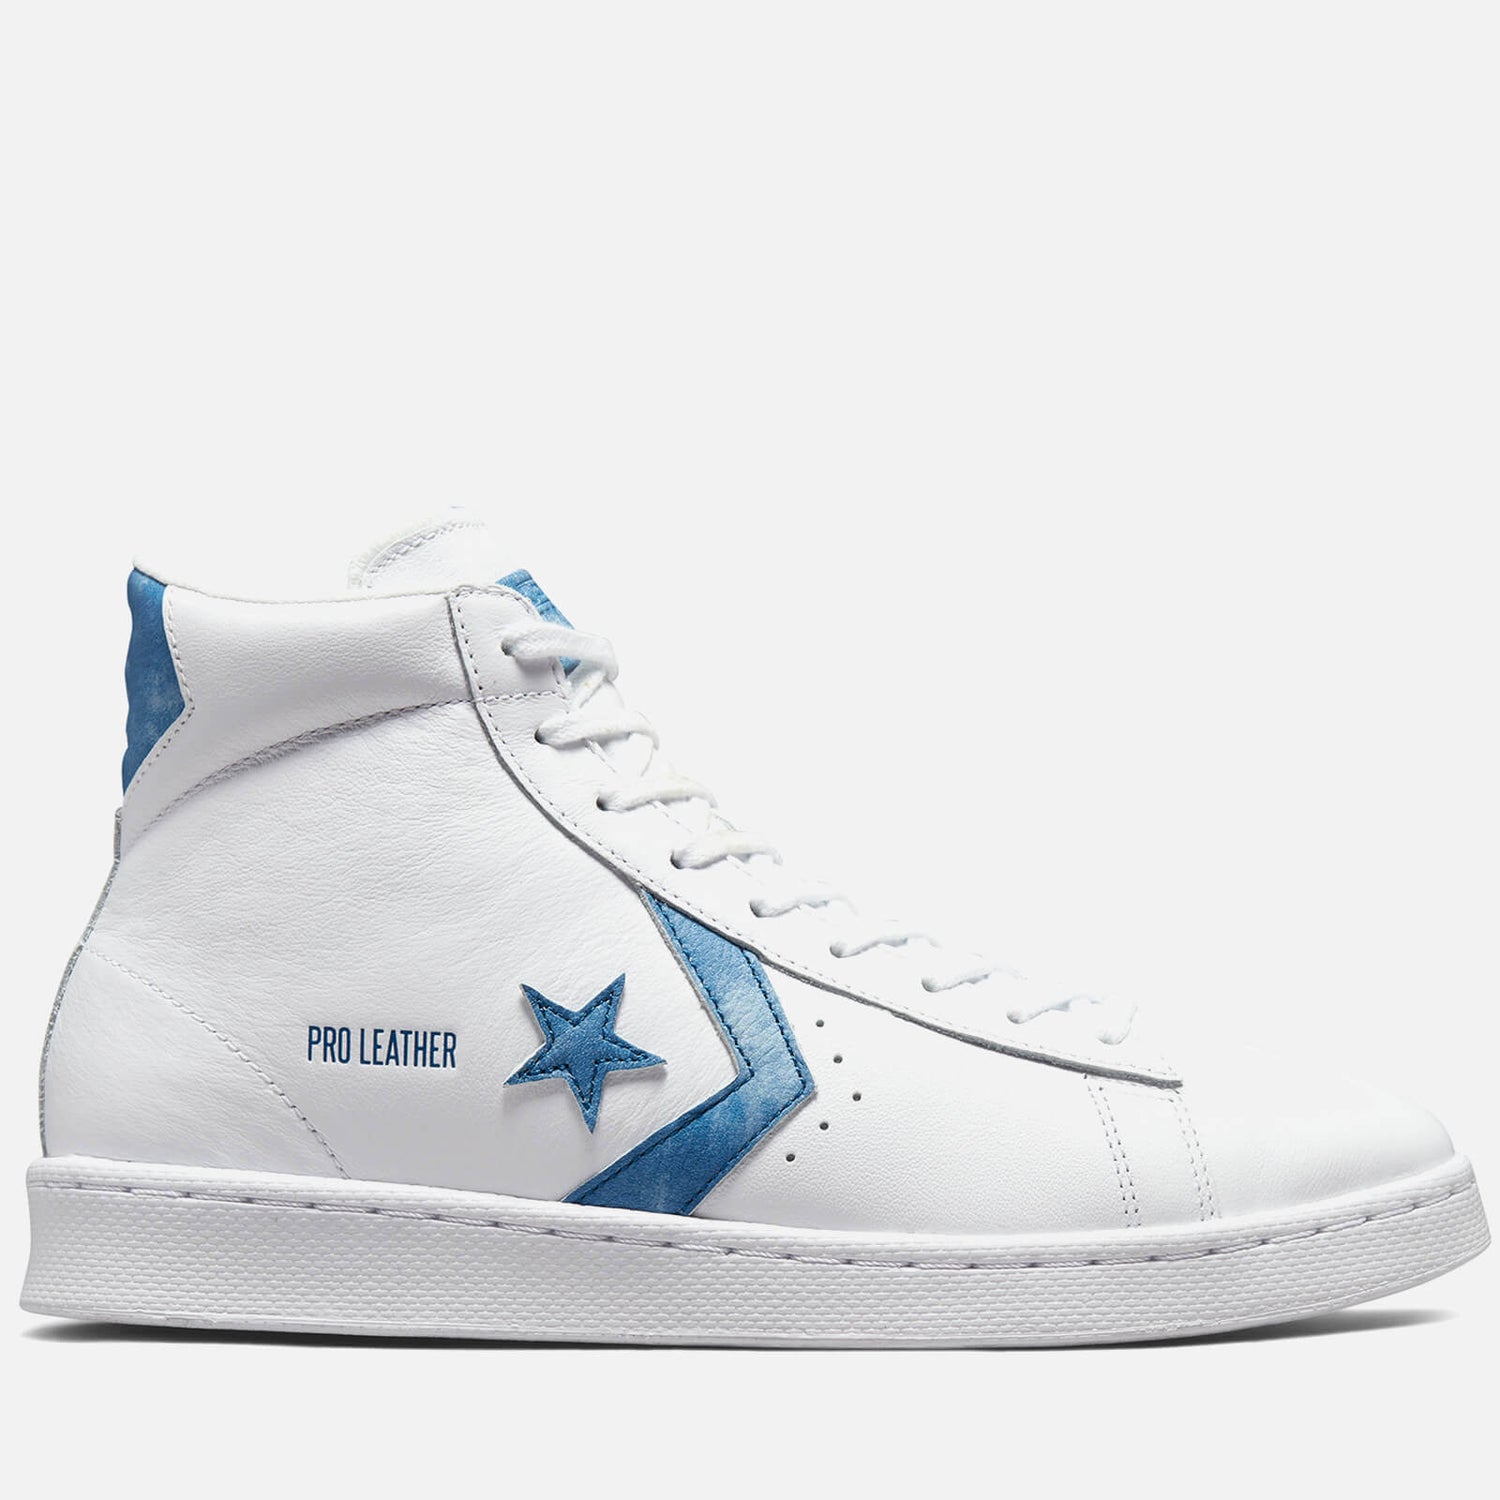 Converse Men's Pro Leather Dip Dyed Hi-Top Trainers - White/Dark Marina Blue/White  